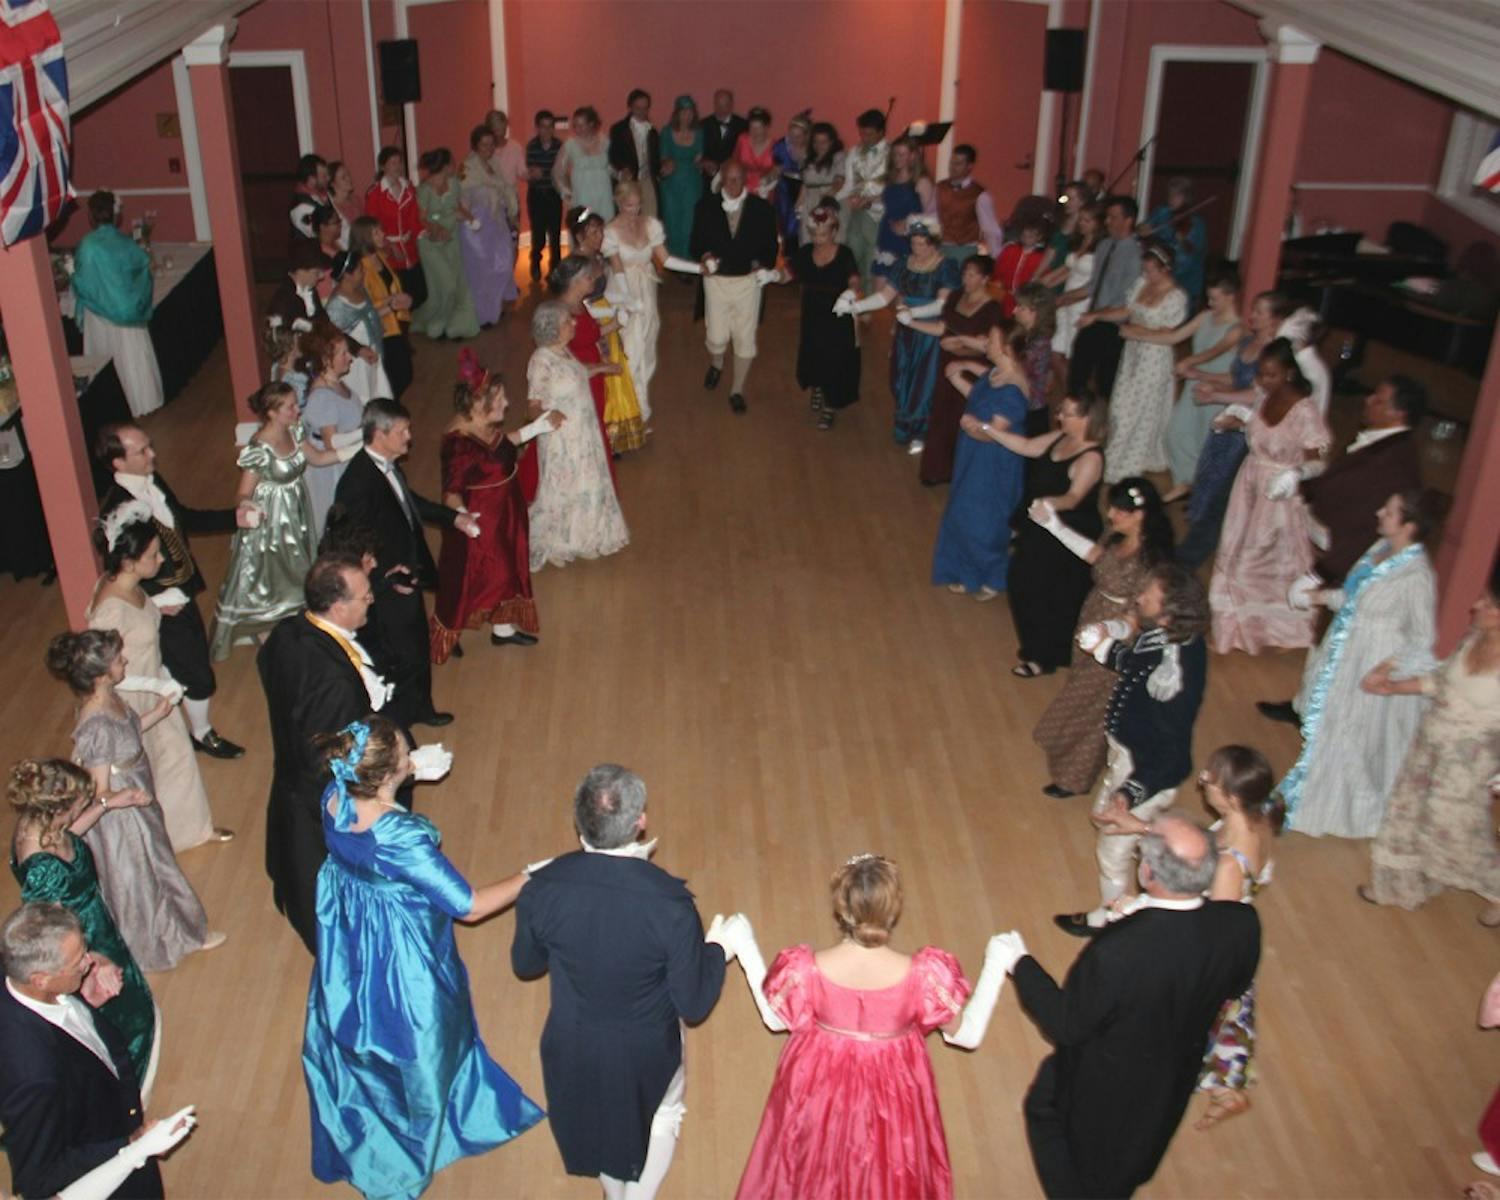 The Jane Austen Summer Program will hold the fourth annual Regency Ball in Gerard Hall on June 18 to celebrate Austen’s legacy&nbsp;(courtesy of Jane Austen Summer Program).